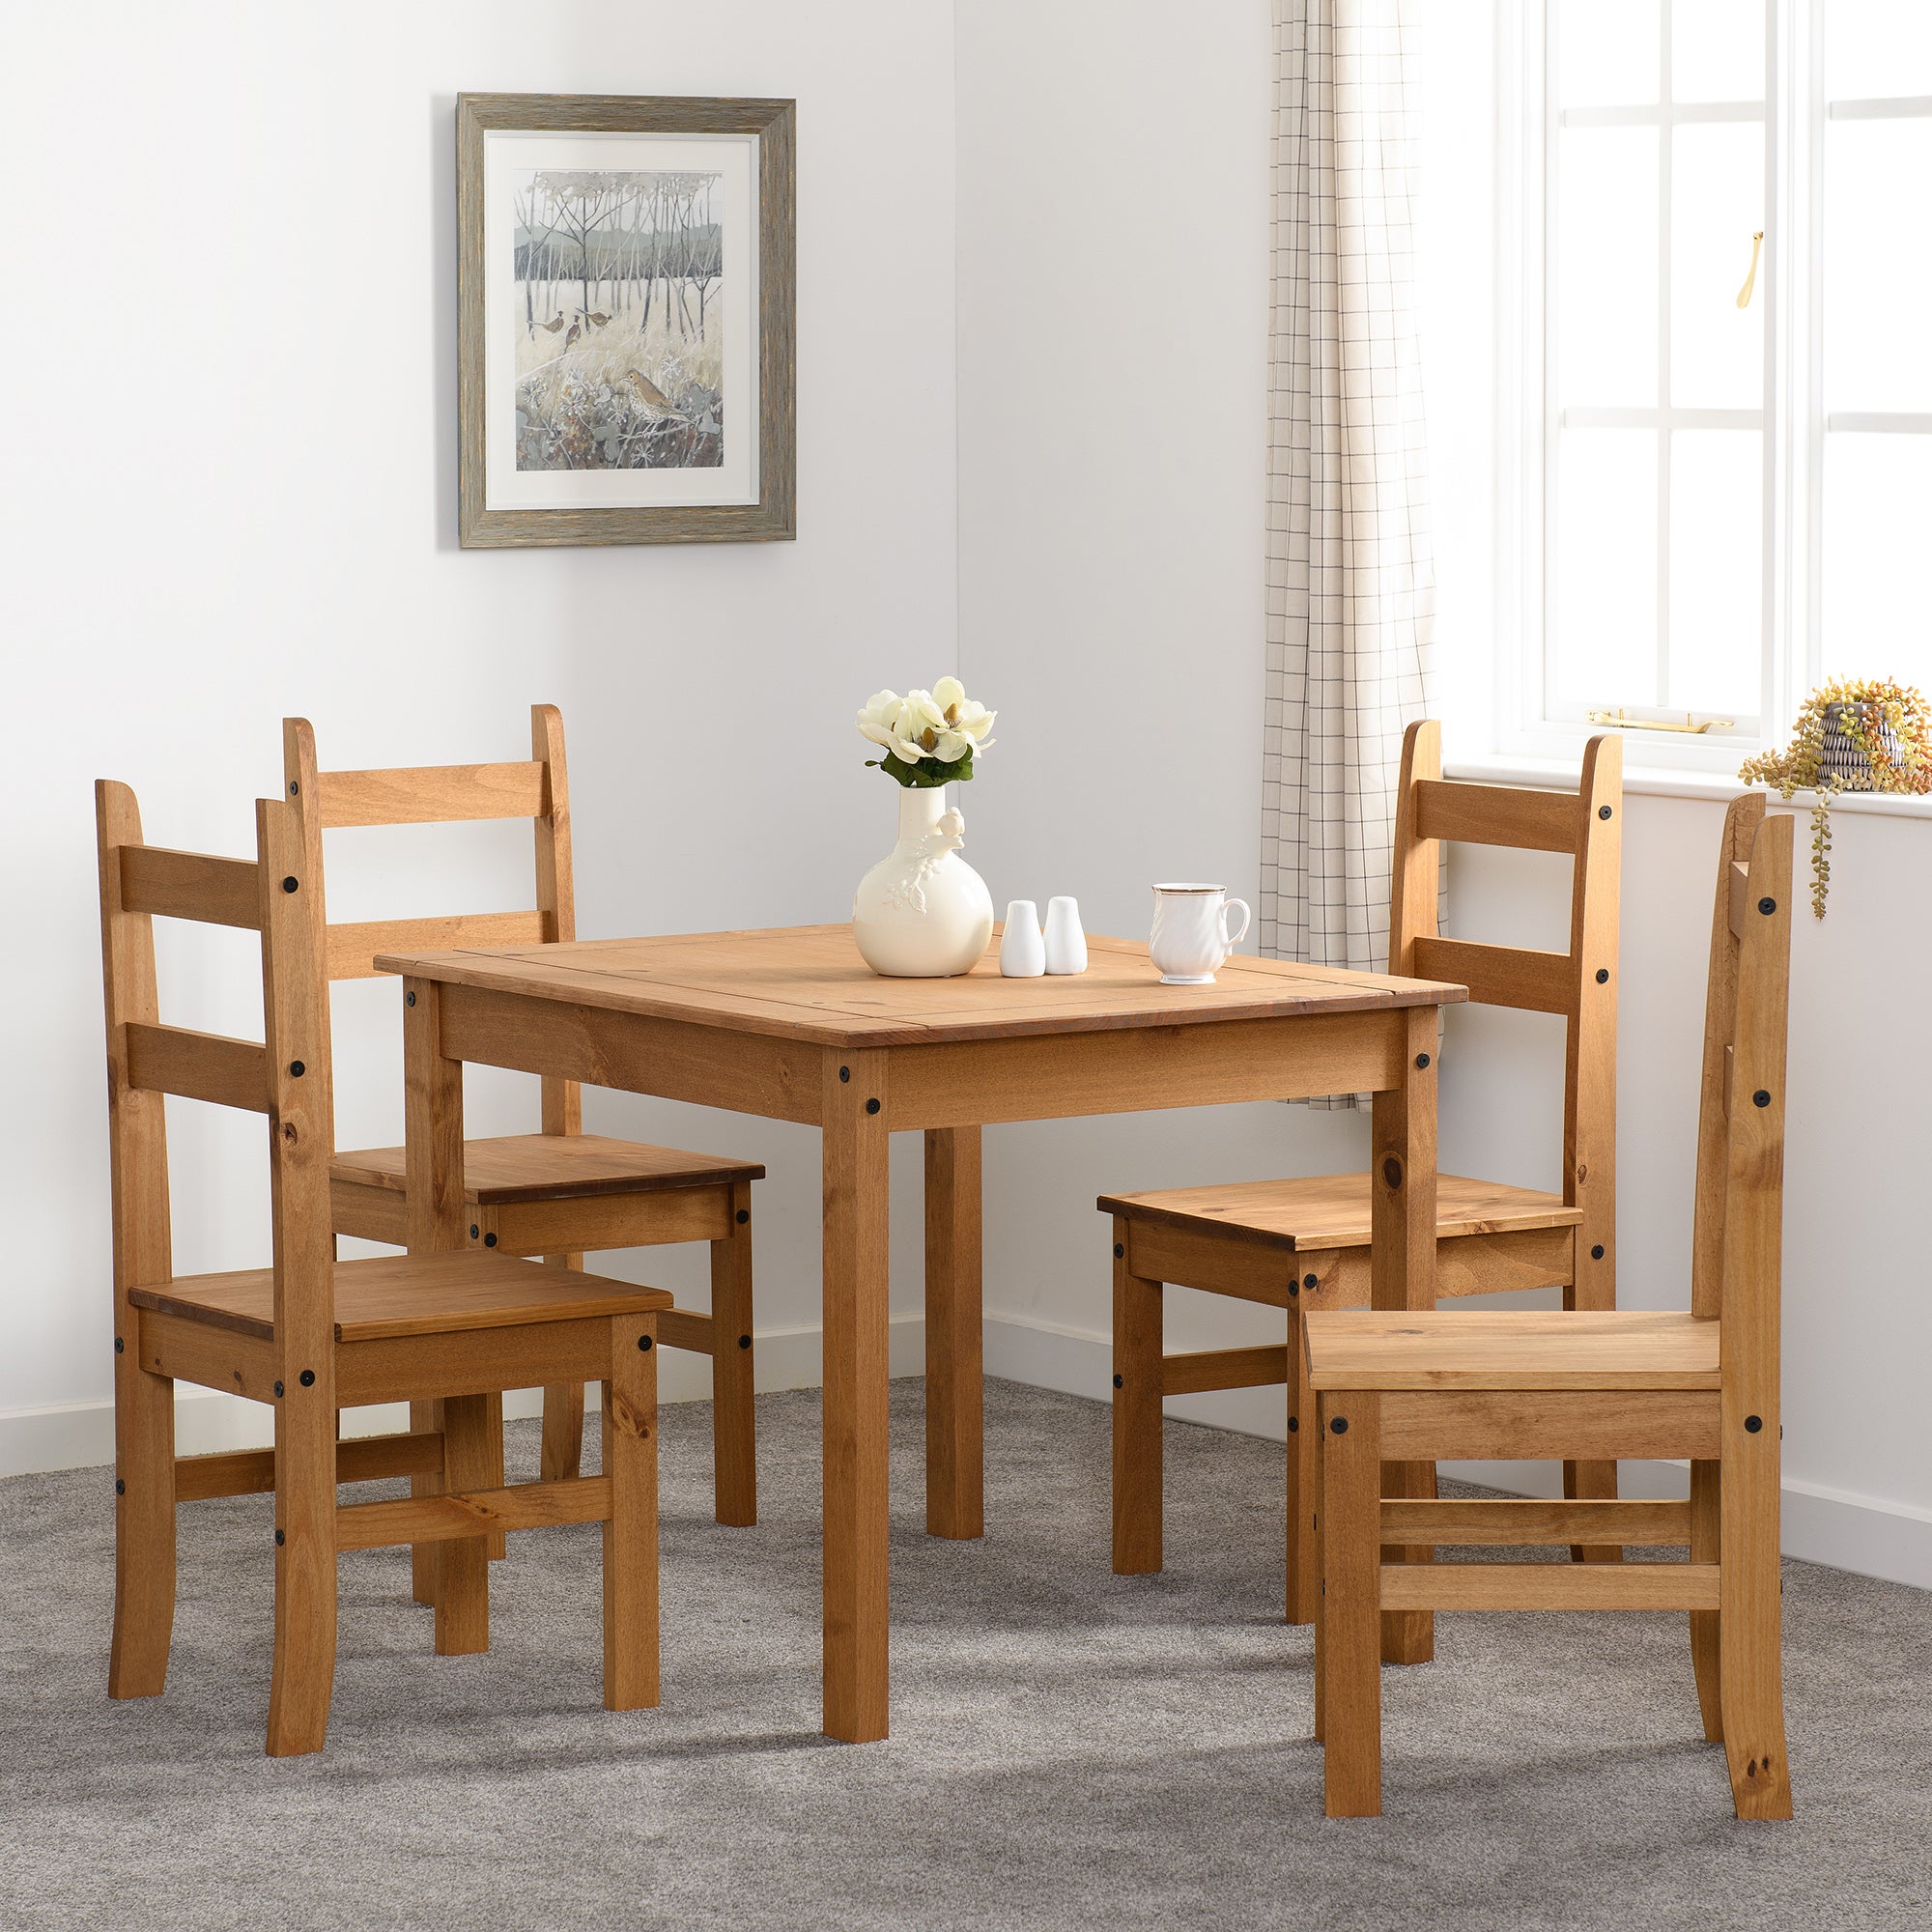 Corona Rectangular Dining Table with 4 Chairs, Pine